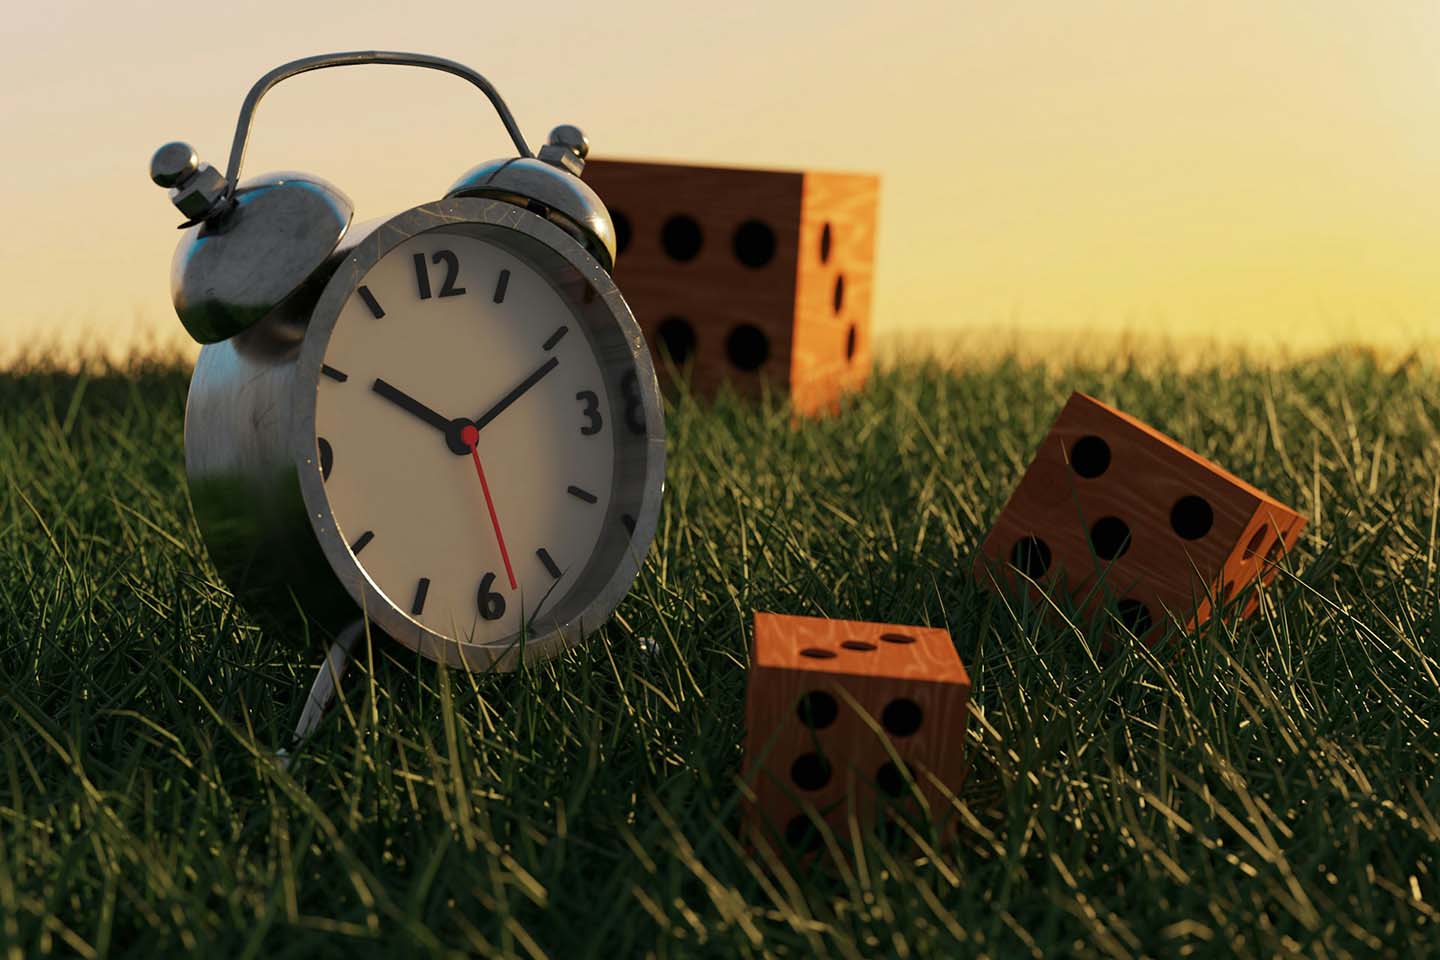 an alarm clock and three wooden dice in a grassy field